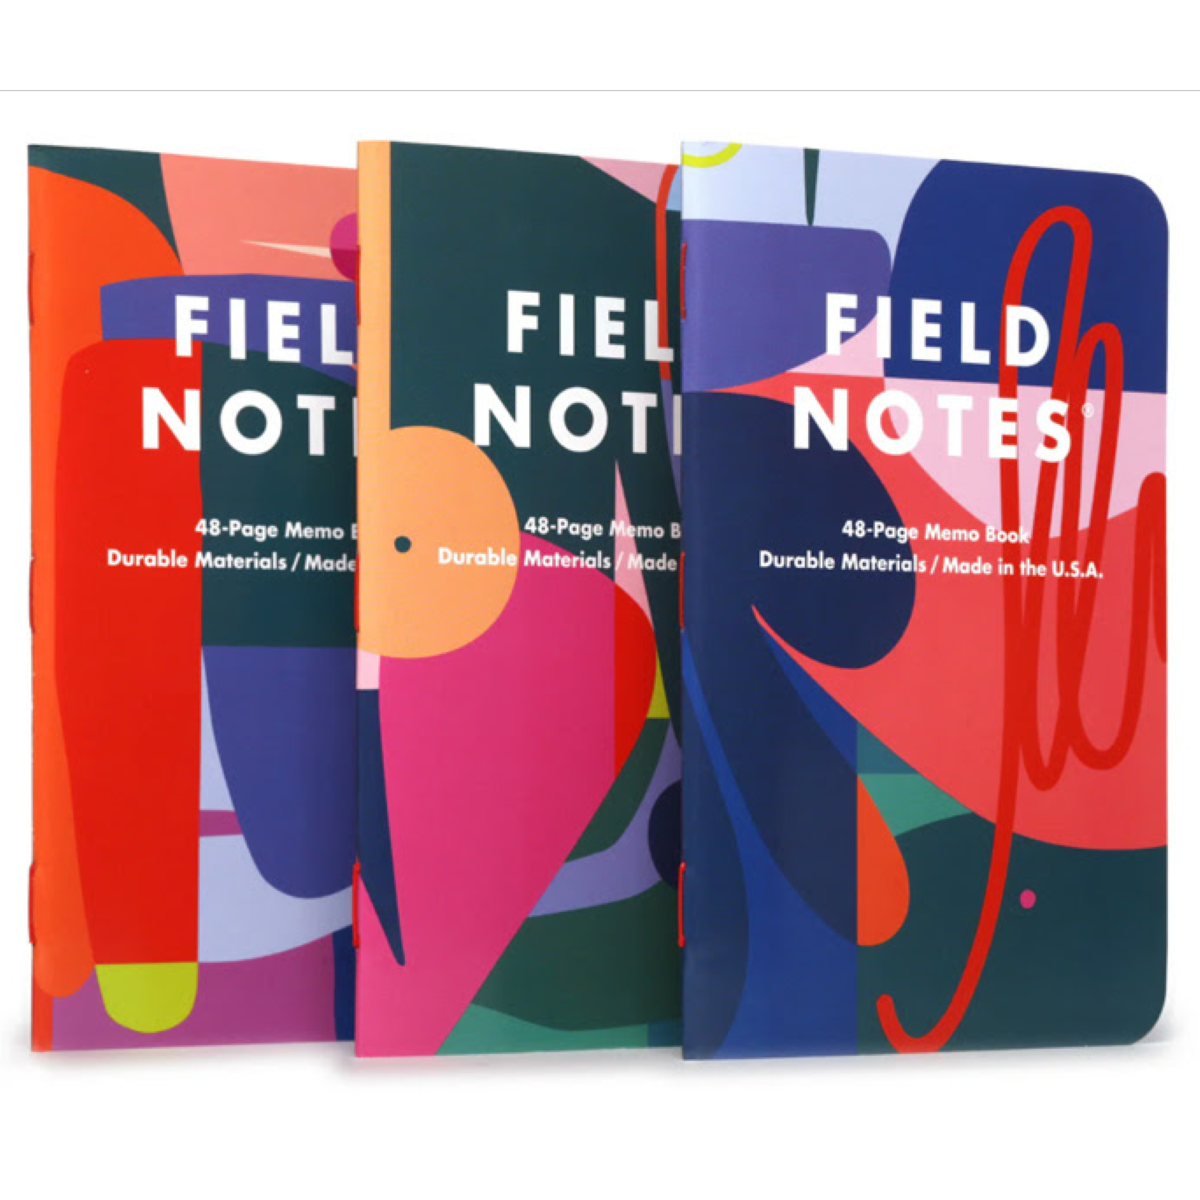 Field Notes Memo Book - Flora (Limited Edition) Field Notes